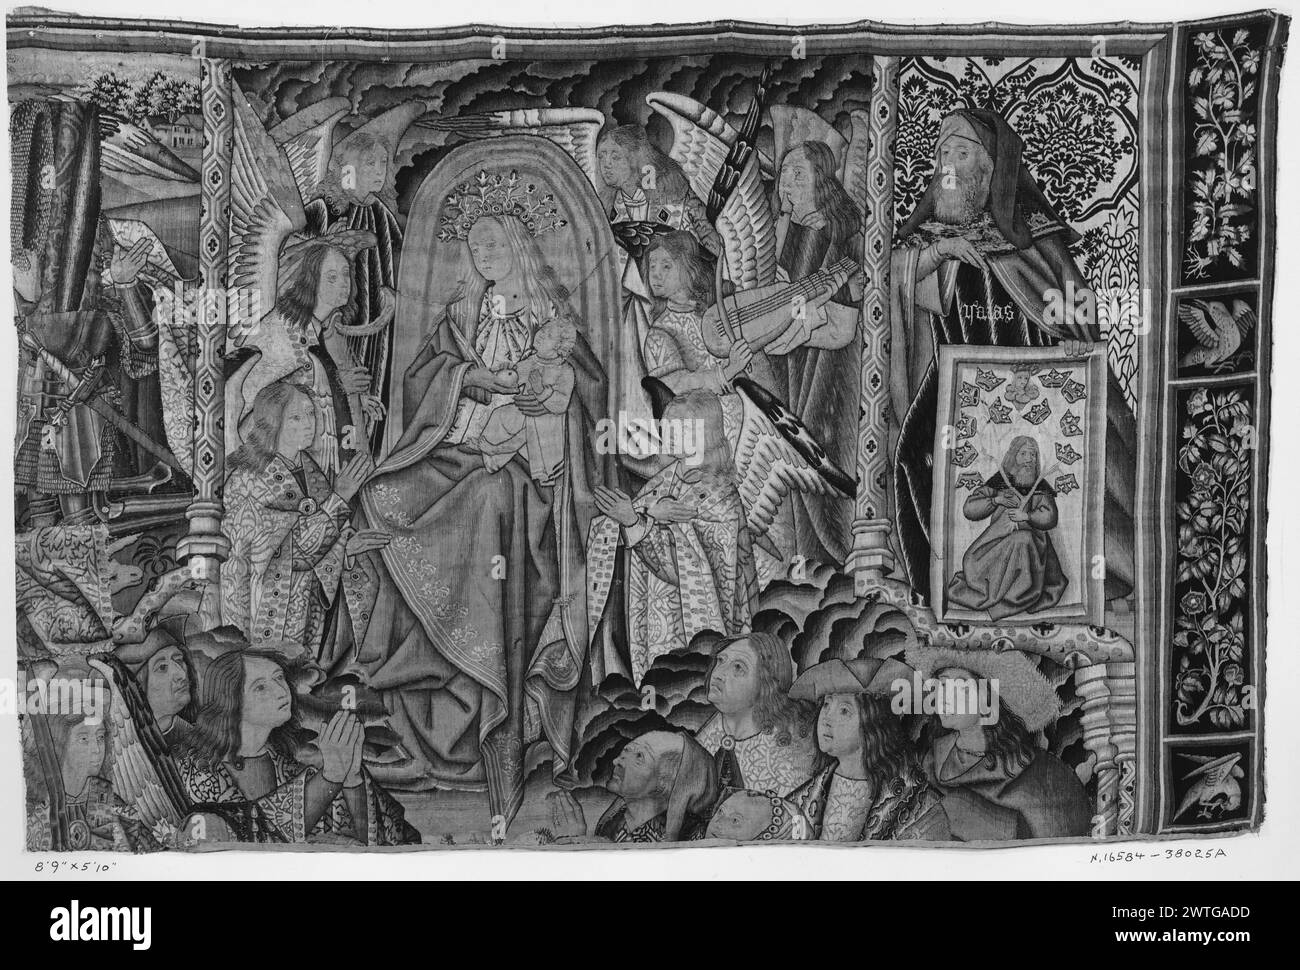 Glorification of Virgin Mary. unknown c. 1500-1510 Tapestry Dimensions: H 5'10' x W 8' (left half of top portion) Tapestry Materials/Techniques: unknown Culture: Southern Netherlands Ownership History: Bramshill chapel; sold, London Sotheby's, 3/13/1931. French & Co. purchased from Spanish Art Galleries, invoiced 3/16/1931. Scotland, Lanark, Glasgow, Burrell Collection. Inscriptions: Inscription in central field on plaque held by man right of center on GCPA 0239472: O DULCE MARIA Inscriptions: Inscription in central field on banderole held by man in lower center on GCPA 0239472: [O] PIA Inscri Stock Photo